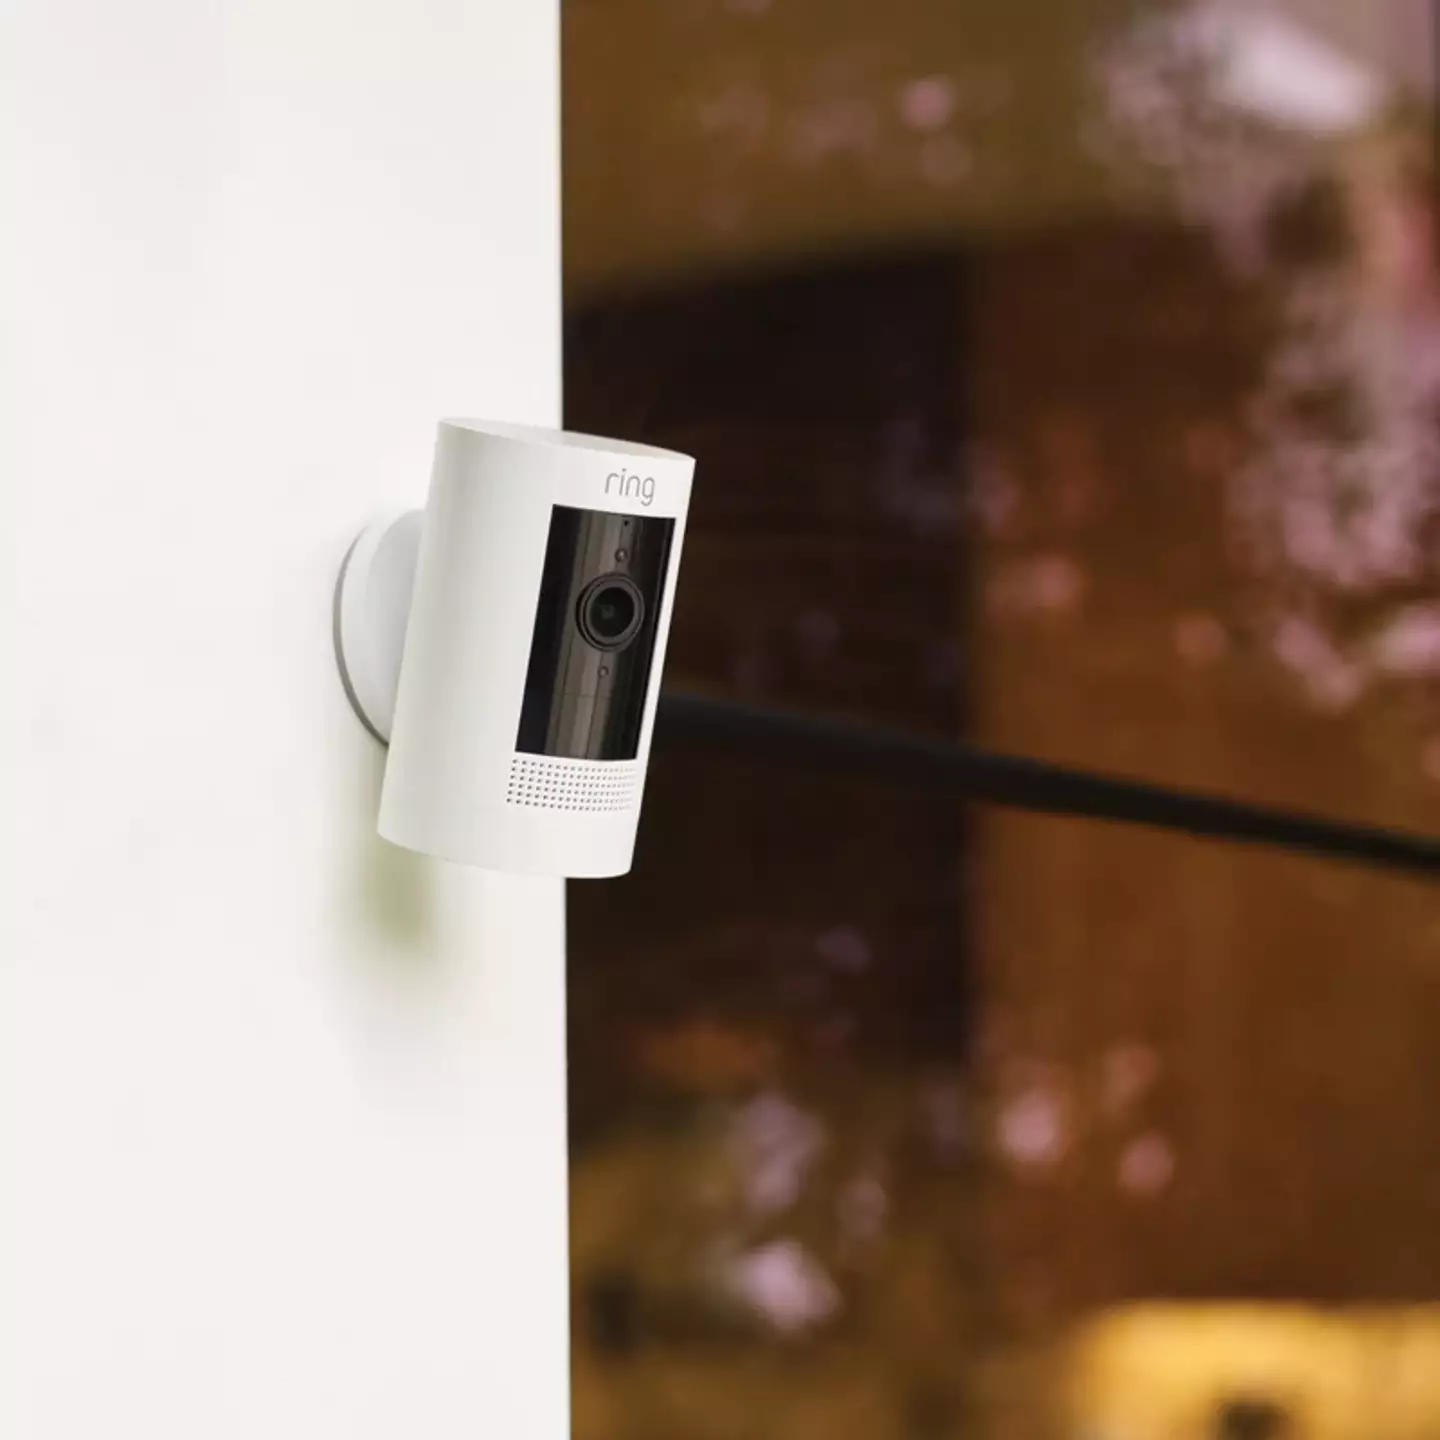 With an easy installation method at a previously affordable price, Ring doorbells have been a popular security option over the past few years.